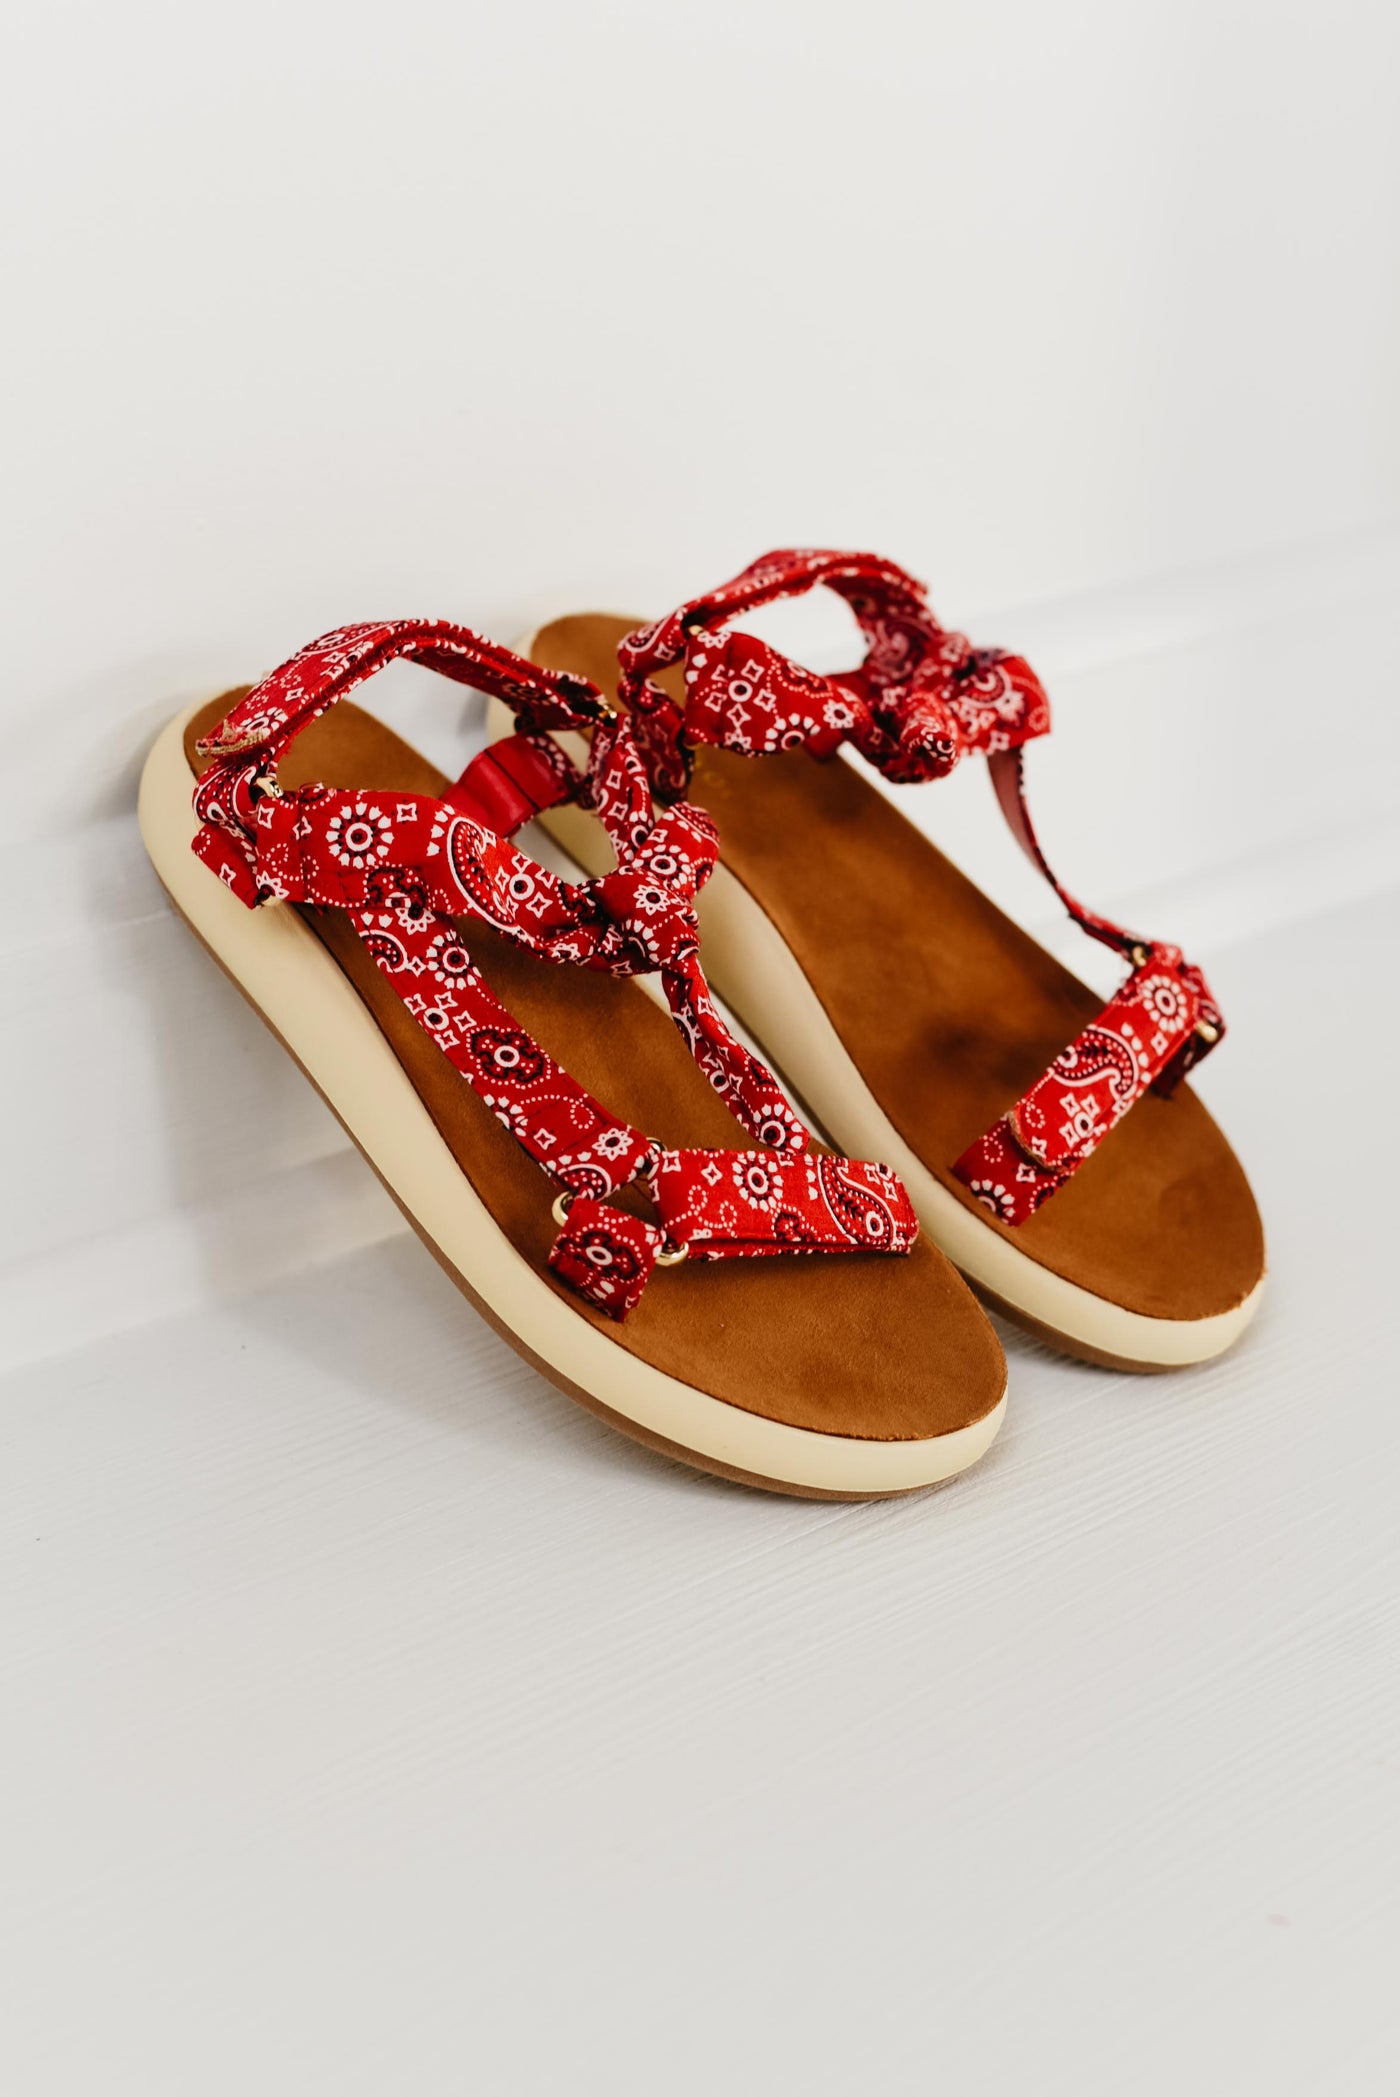 The Earthbound Tie Front Sandal - Red Paisley